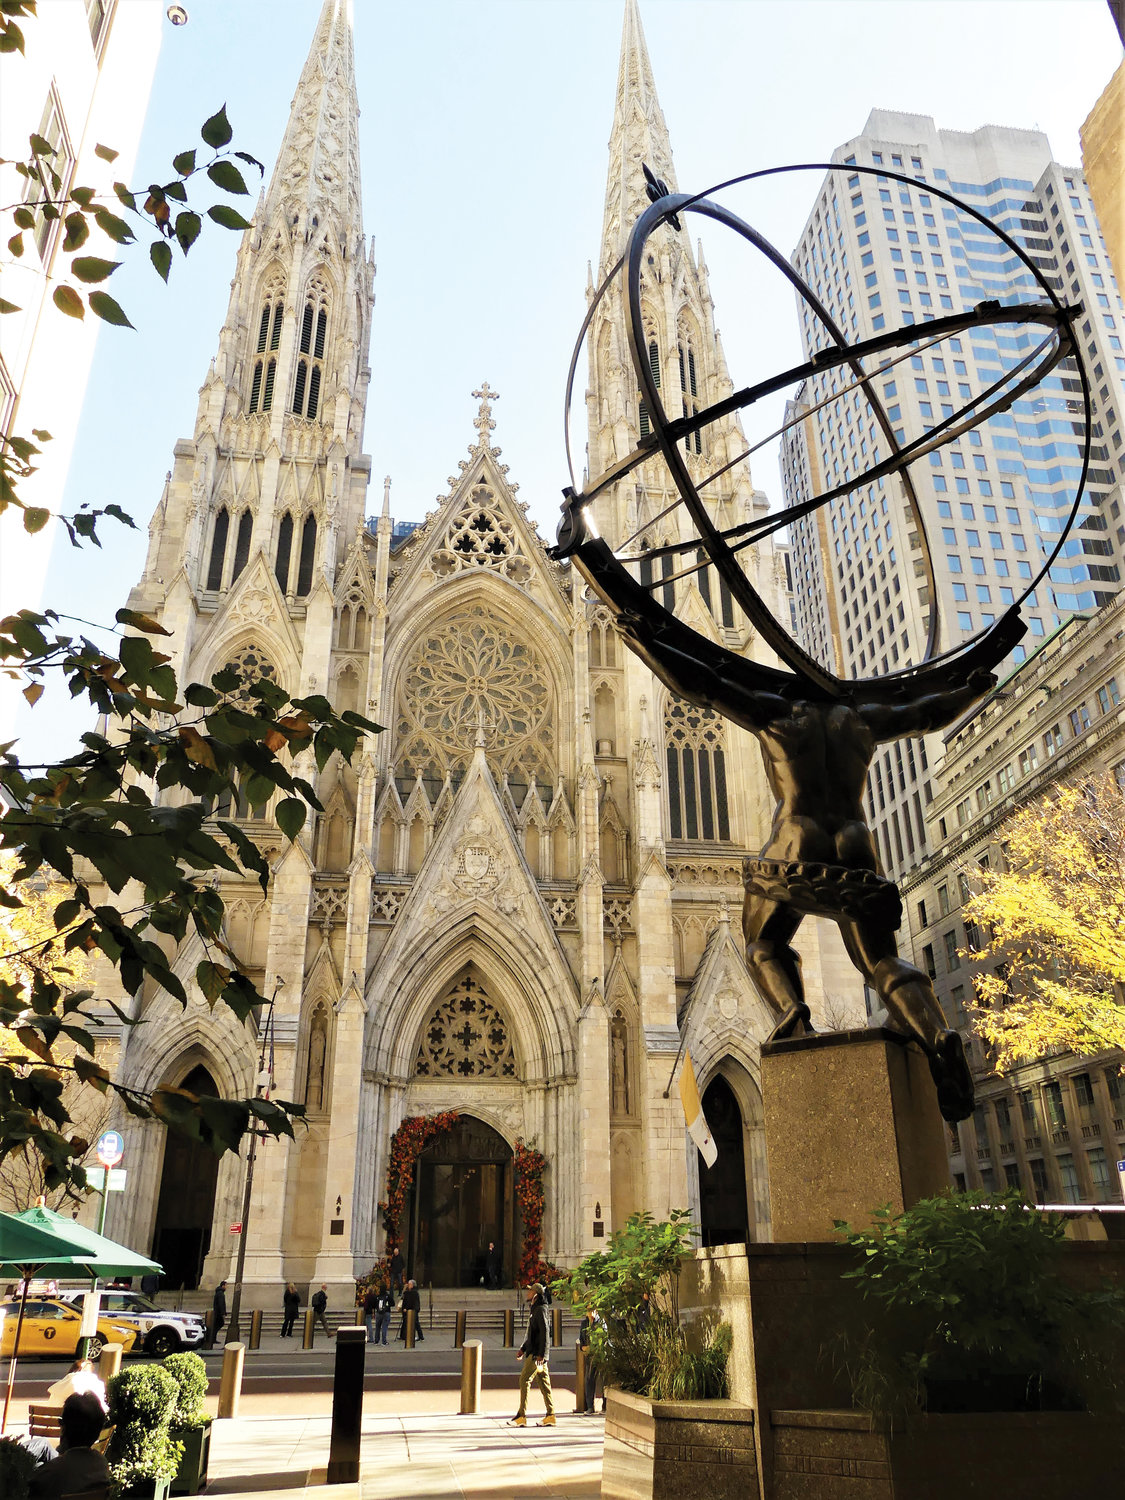 BEGINNING AND ENDING—In homage to the cover of our first issue on Sept. 27, 1981, which also featured St. Patrick’s Cathedral, we conclude our publishing journey with an image of St. Patrick’s. The photo also shows the iconic sculpture of Atlas in bronze in the foreground.